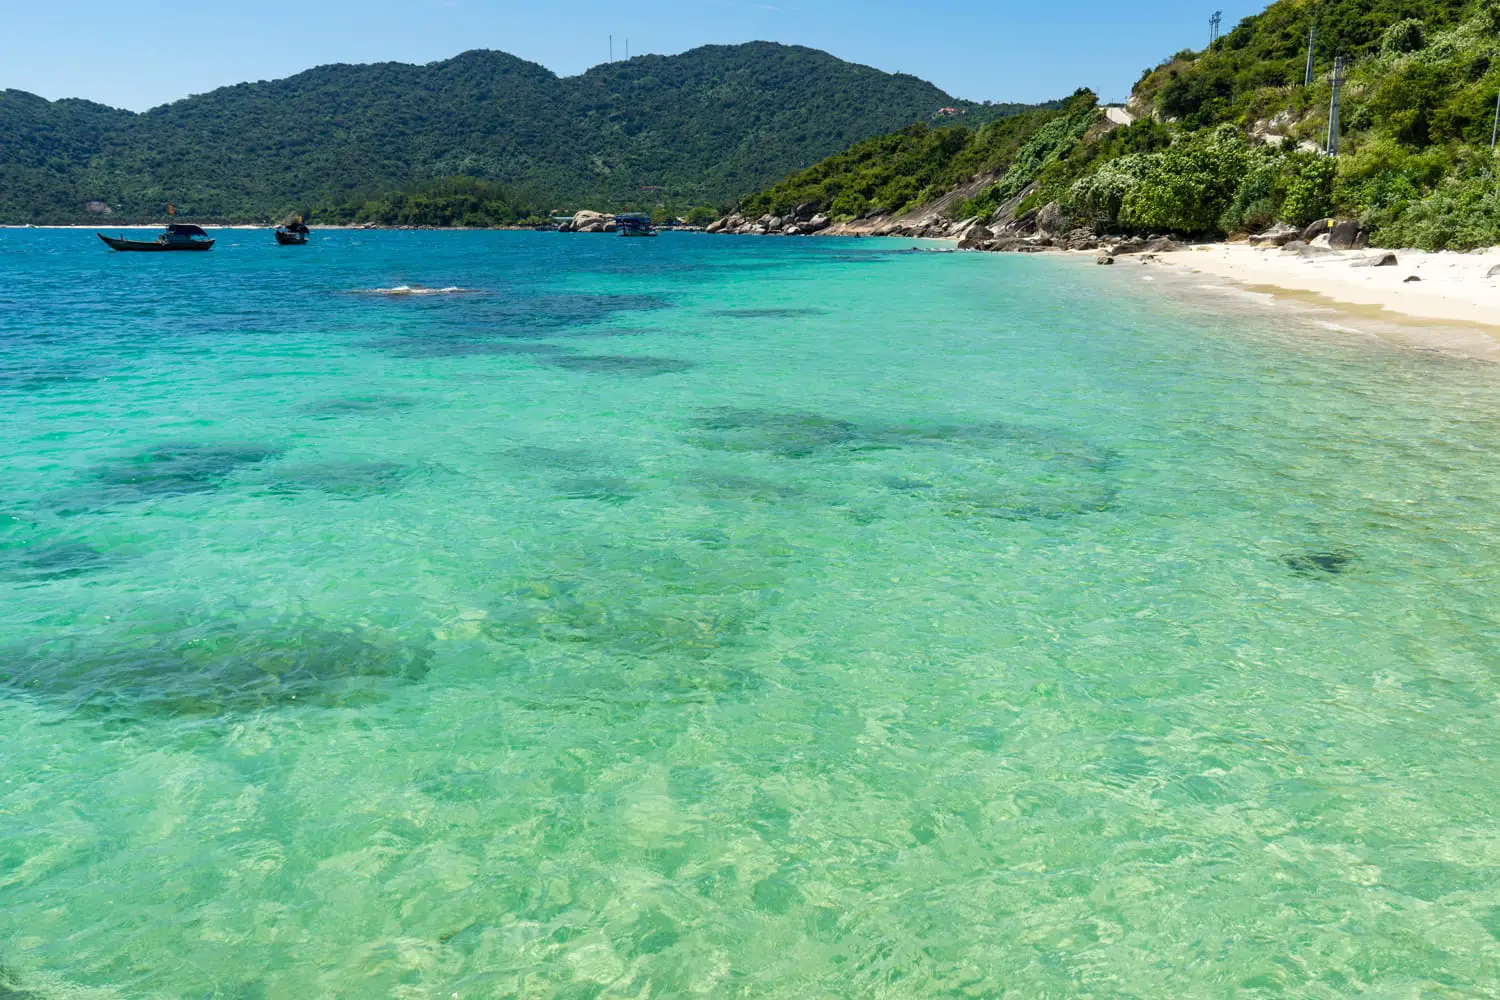 Cham Island in the archipelago of Ku Lao Cham in Vietnam with its beautiful beaches, landscapes and wildlife.